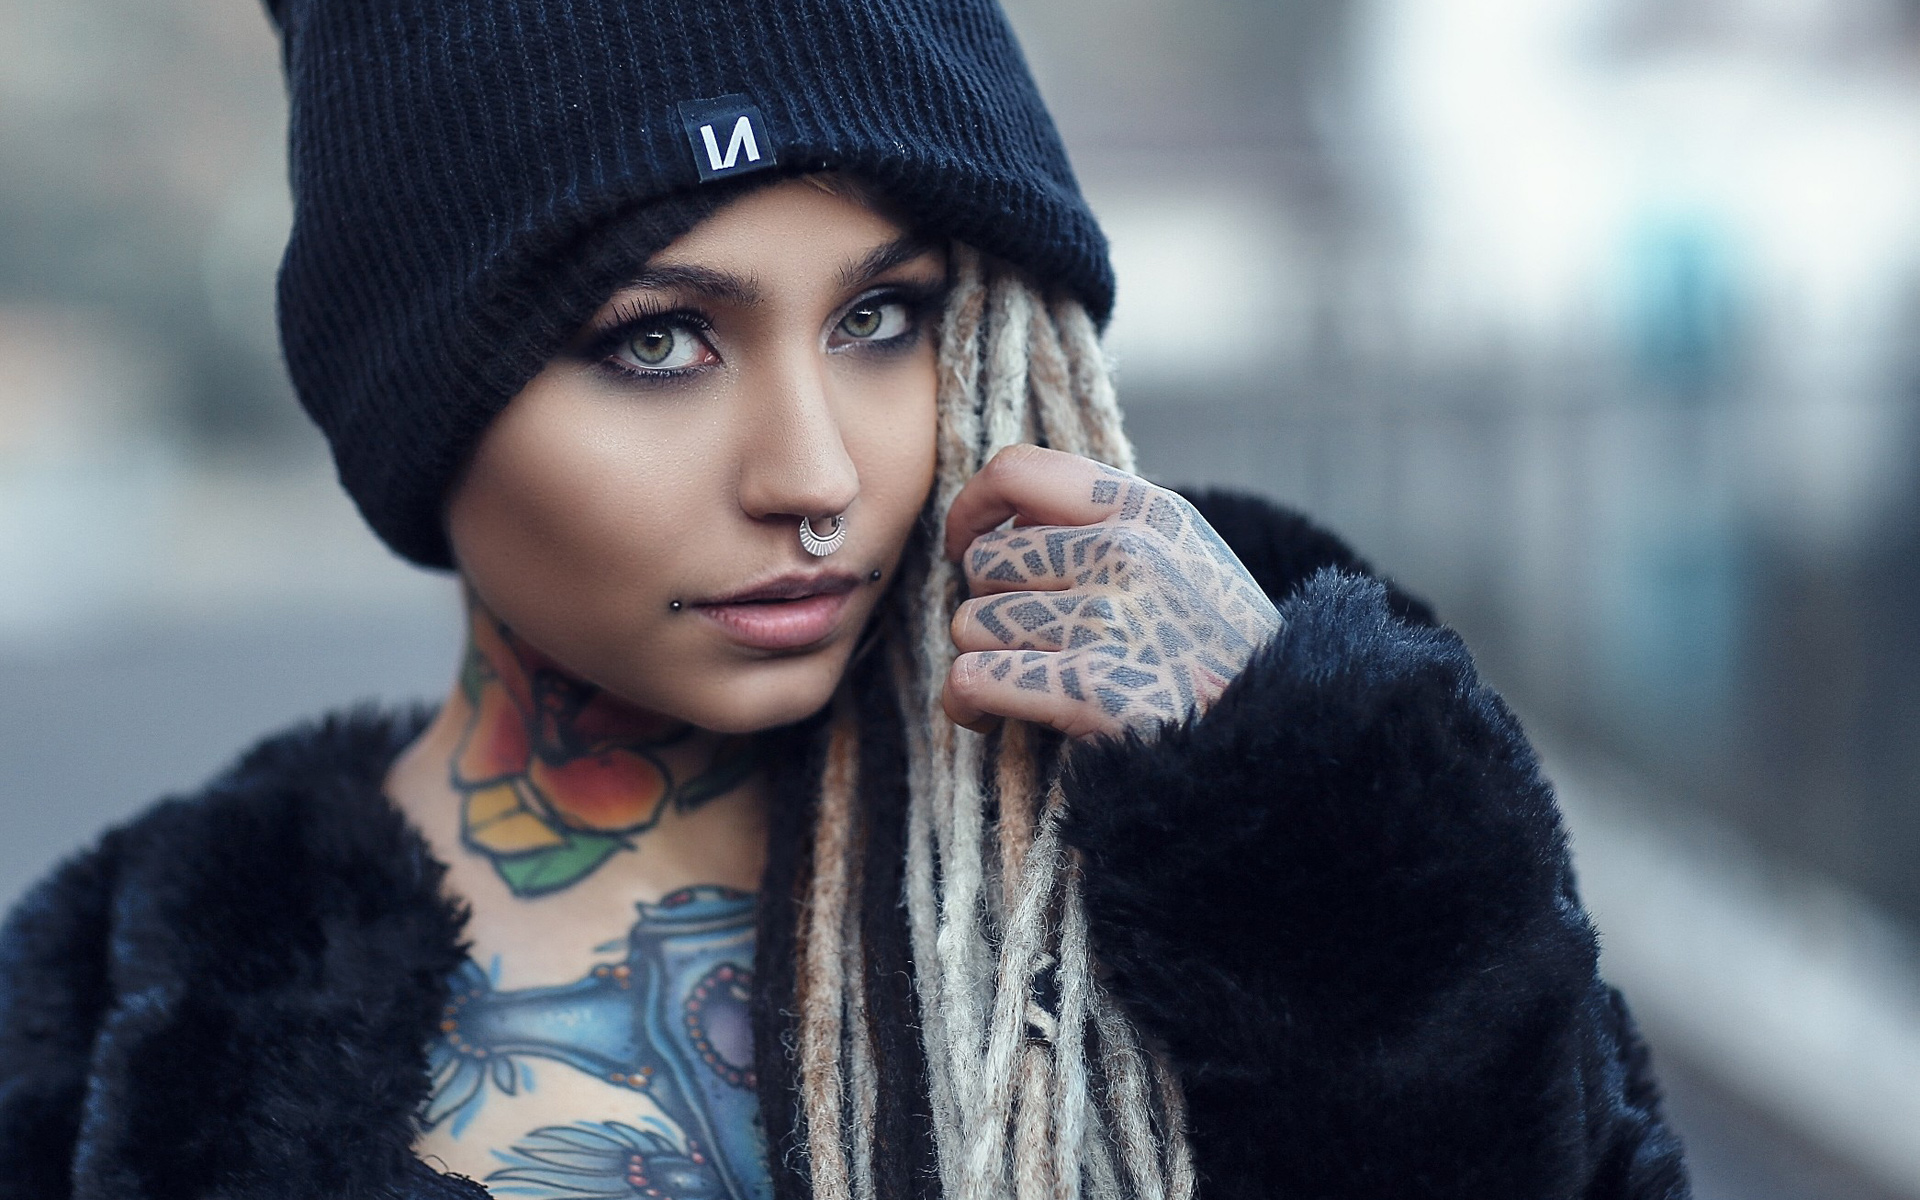 Free Download Tattoo Girl Wallpaper Hd [1920x1200] For Your Desktop Mobile And Tablet Explore